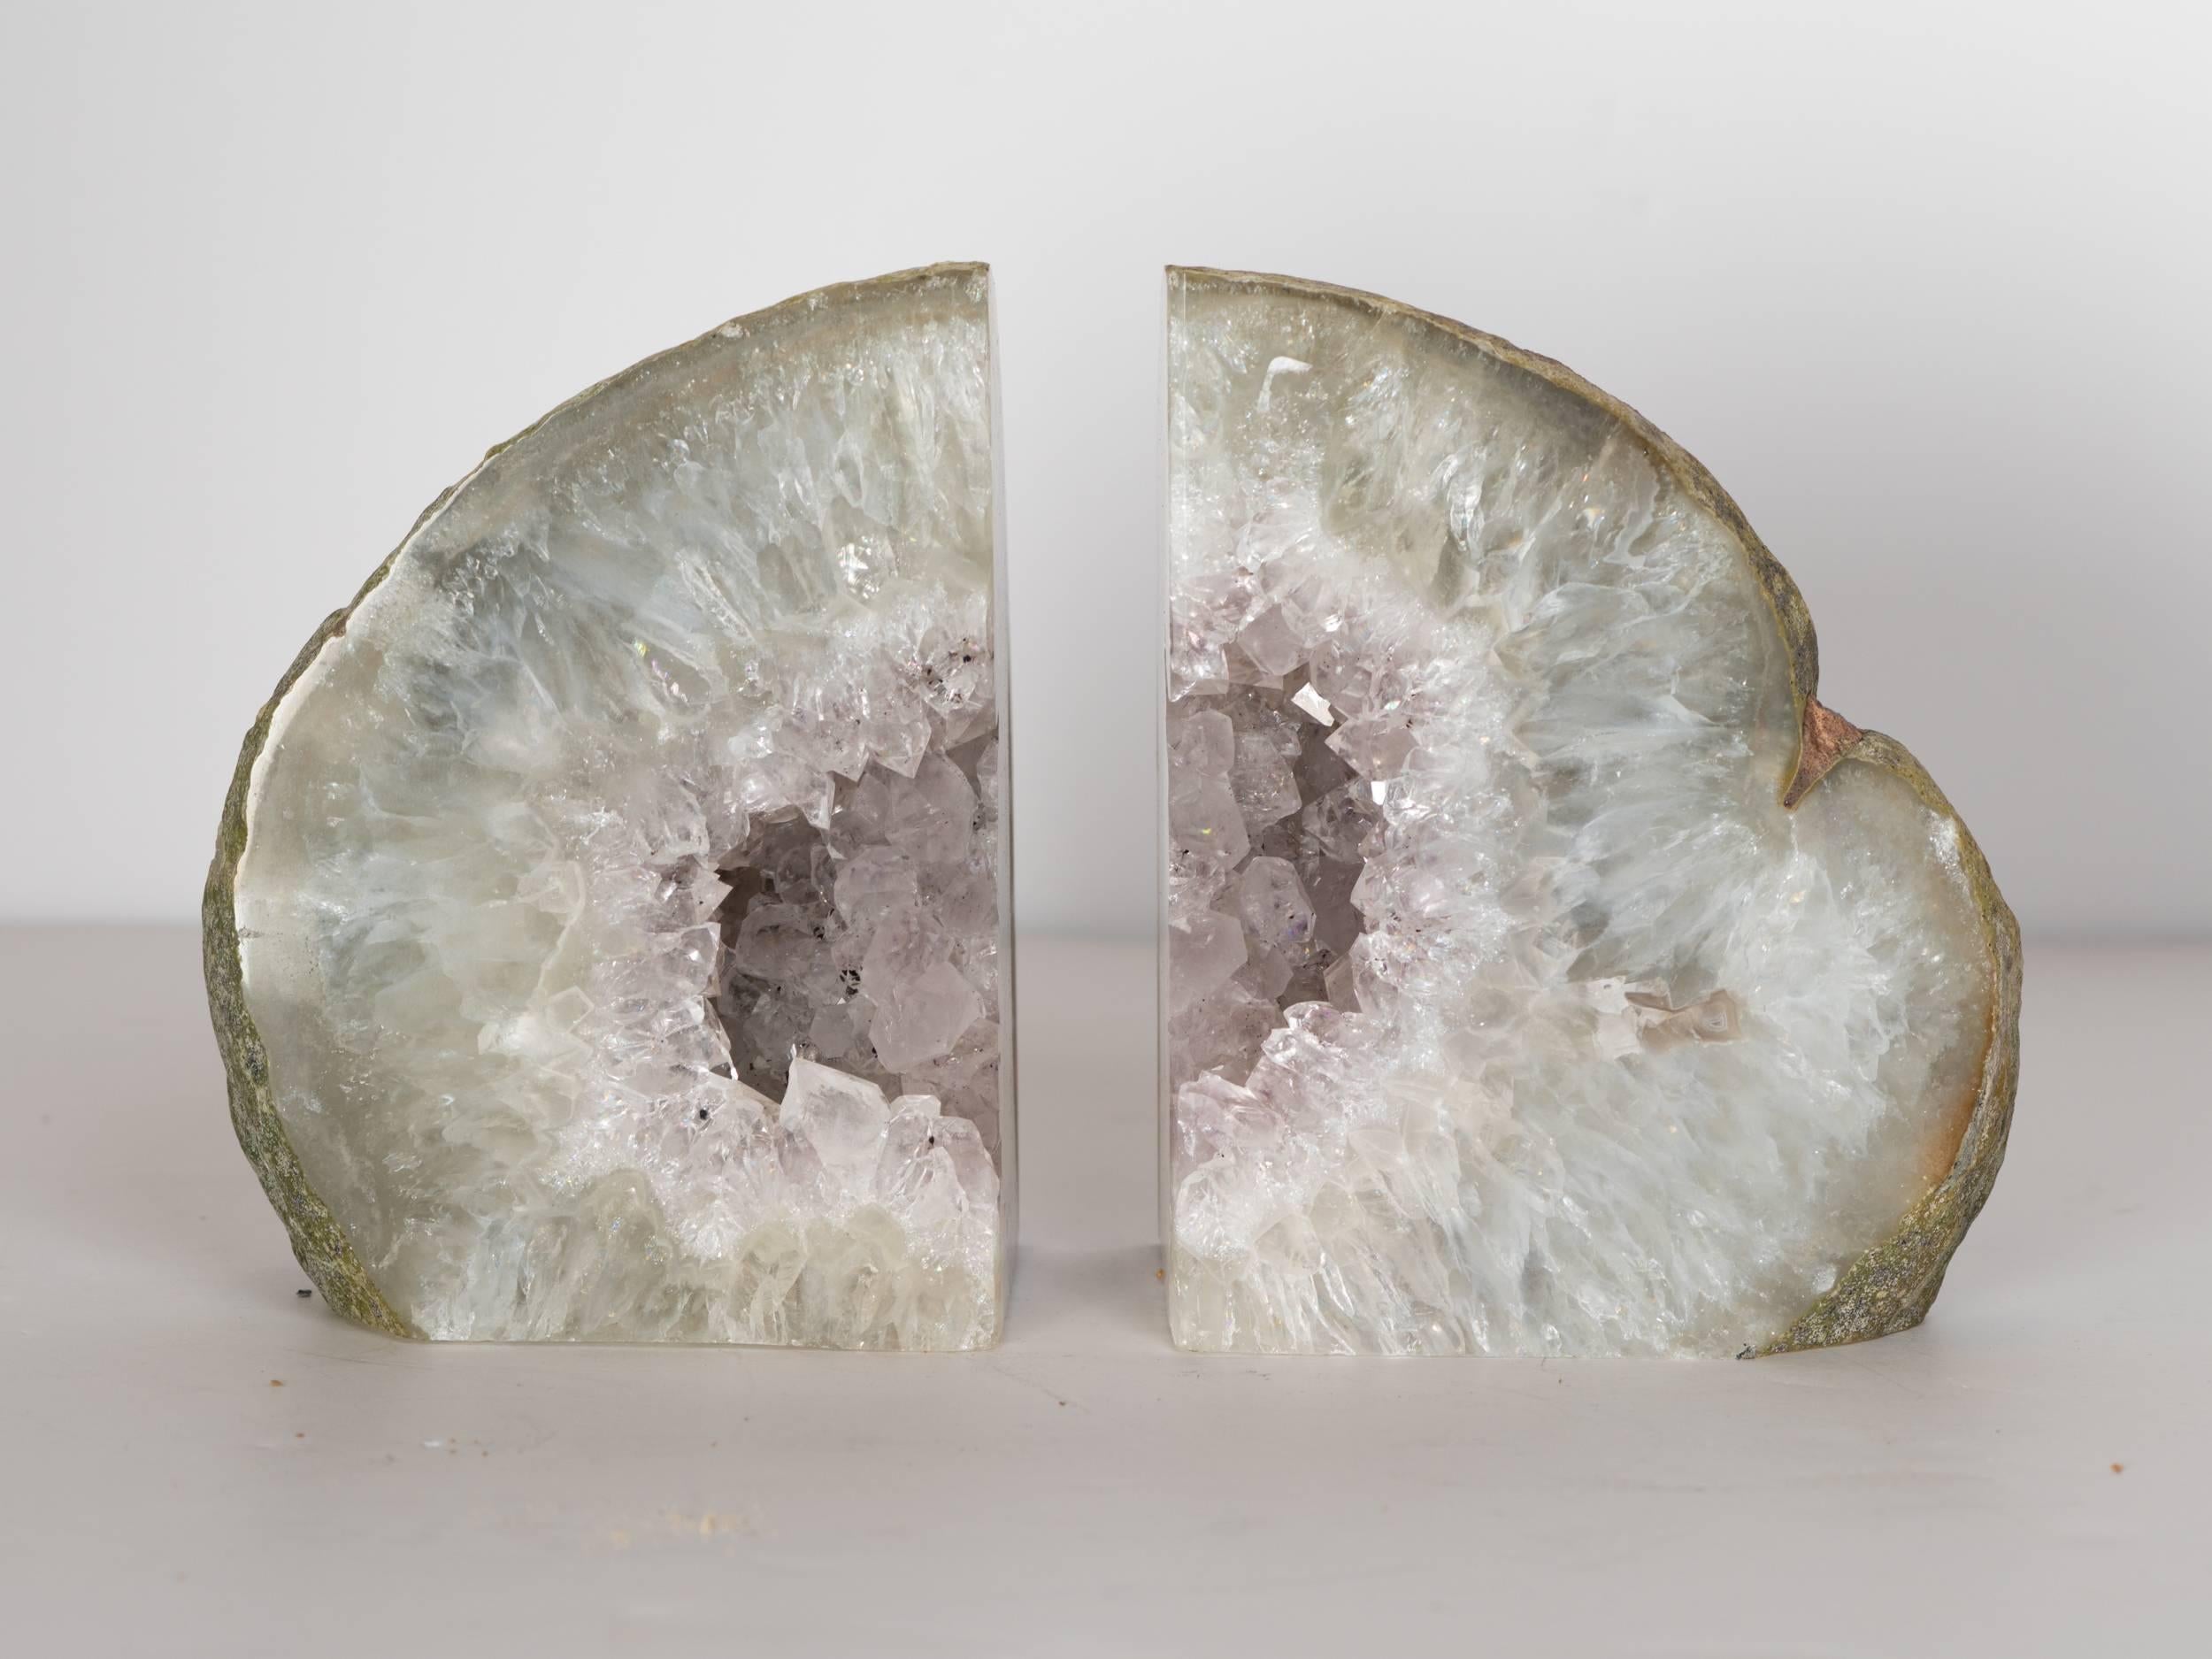 Organic Modern Pair of Organic Quartz Crystal Bookends with Amethyst Center Detail